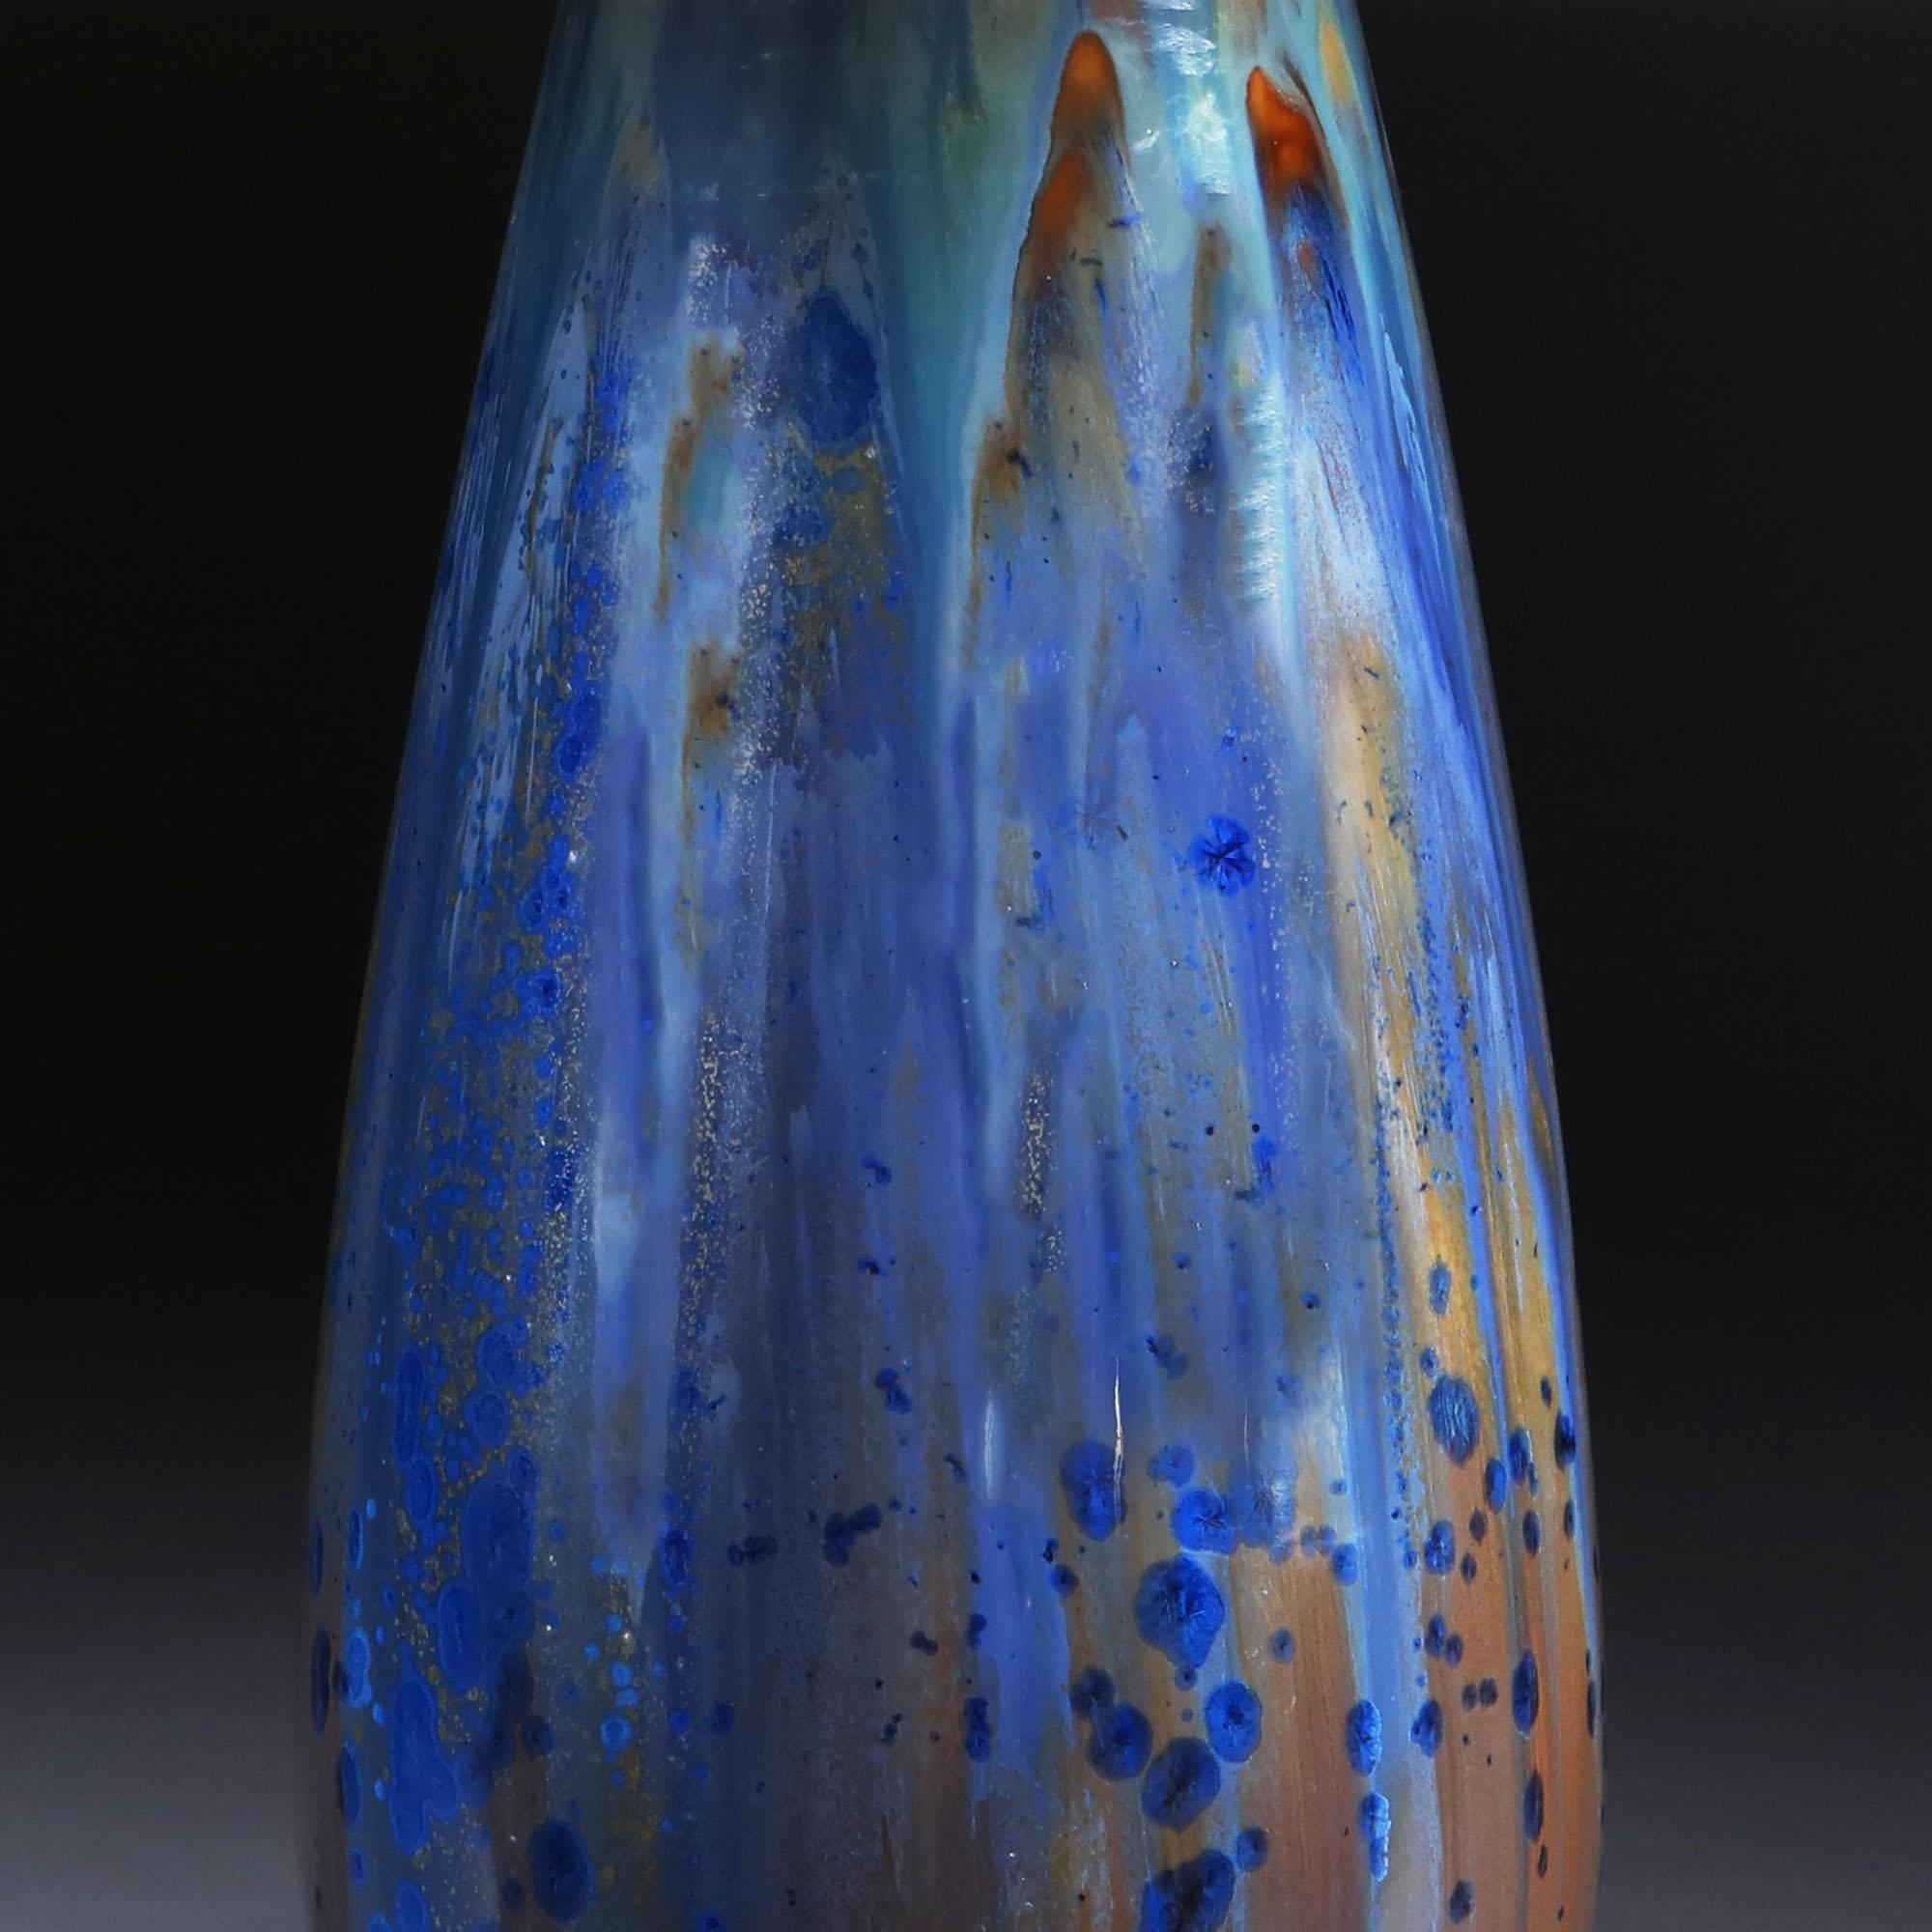 An early 20th century art pottery vase by Pierrefonds, with blue and gold glaze in drip and crystalline glaze formations. Now mounted as a lamp.

Stamped to the base, Pierrefonds.

Please note: lampshade not included.

Currently wired for the UK.